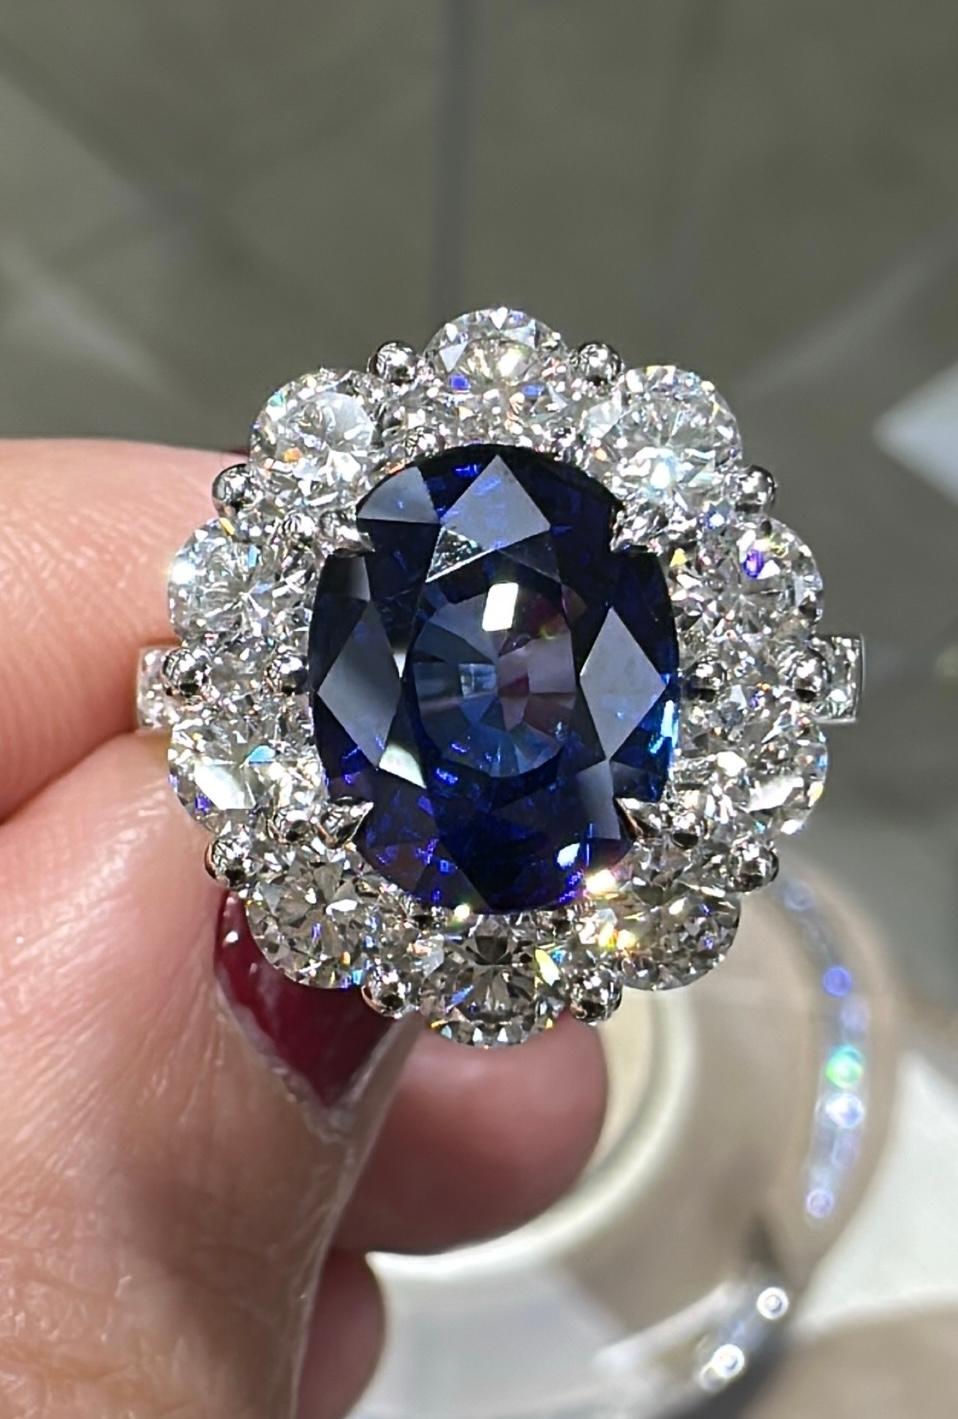 Blue sapphire statement cocktail ring is a great way to create an elegant, princess-like look.
The center stone is oval in shape and has gorgeous facets. For extra sparkle, it has been framed by 1.34 round diamonds forming a beautiful halo around